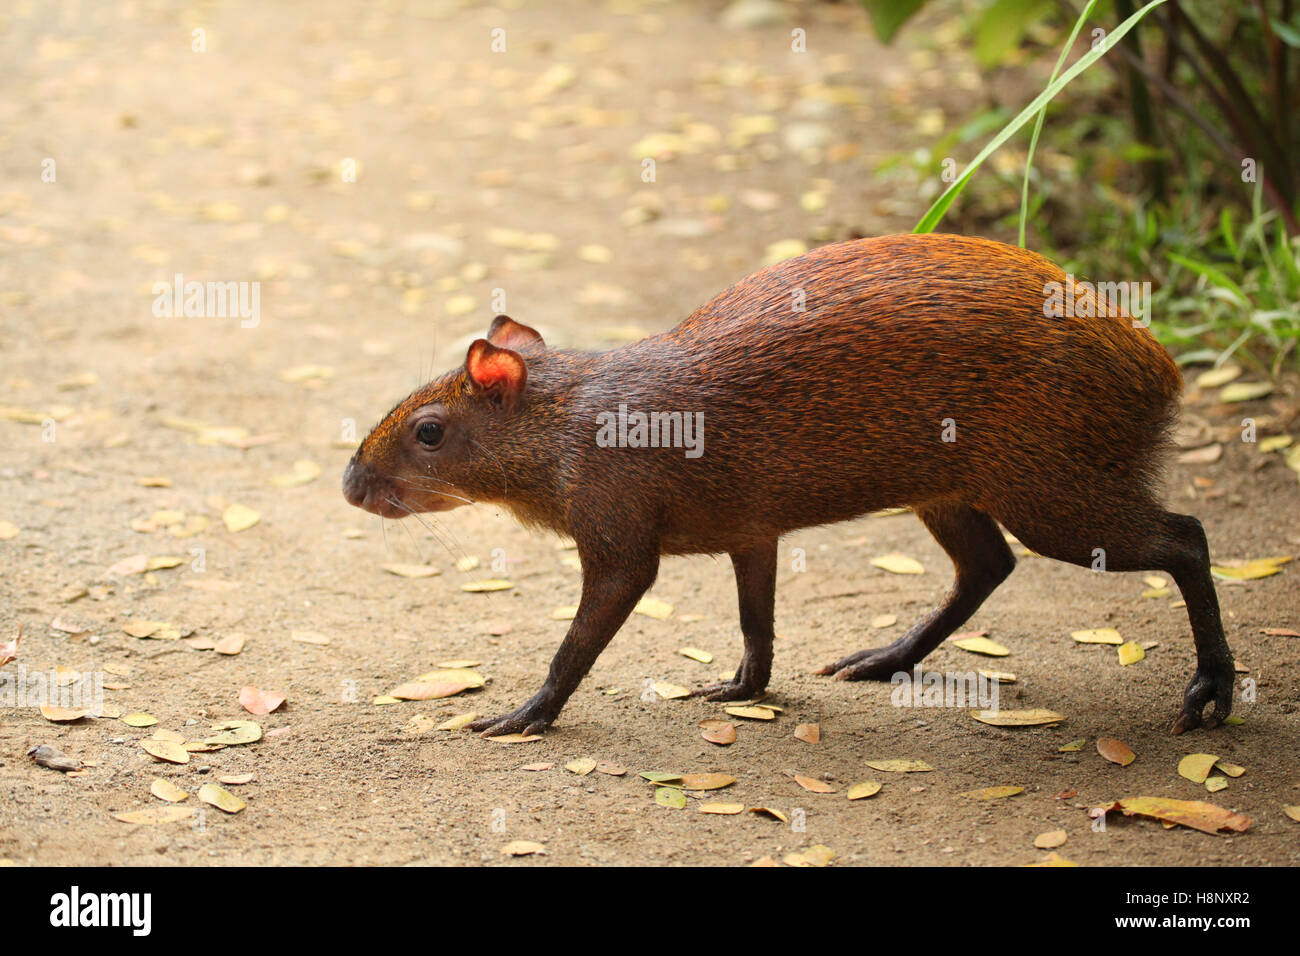 Common Agouti rodent running across the path, San José Province, San Miguel, Costa Rica Stock Photo